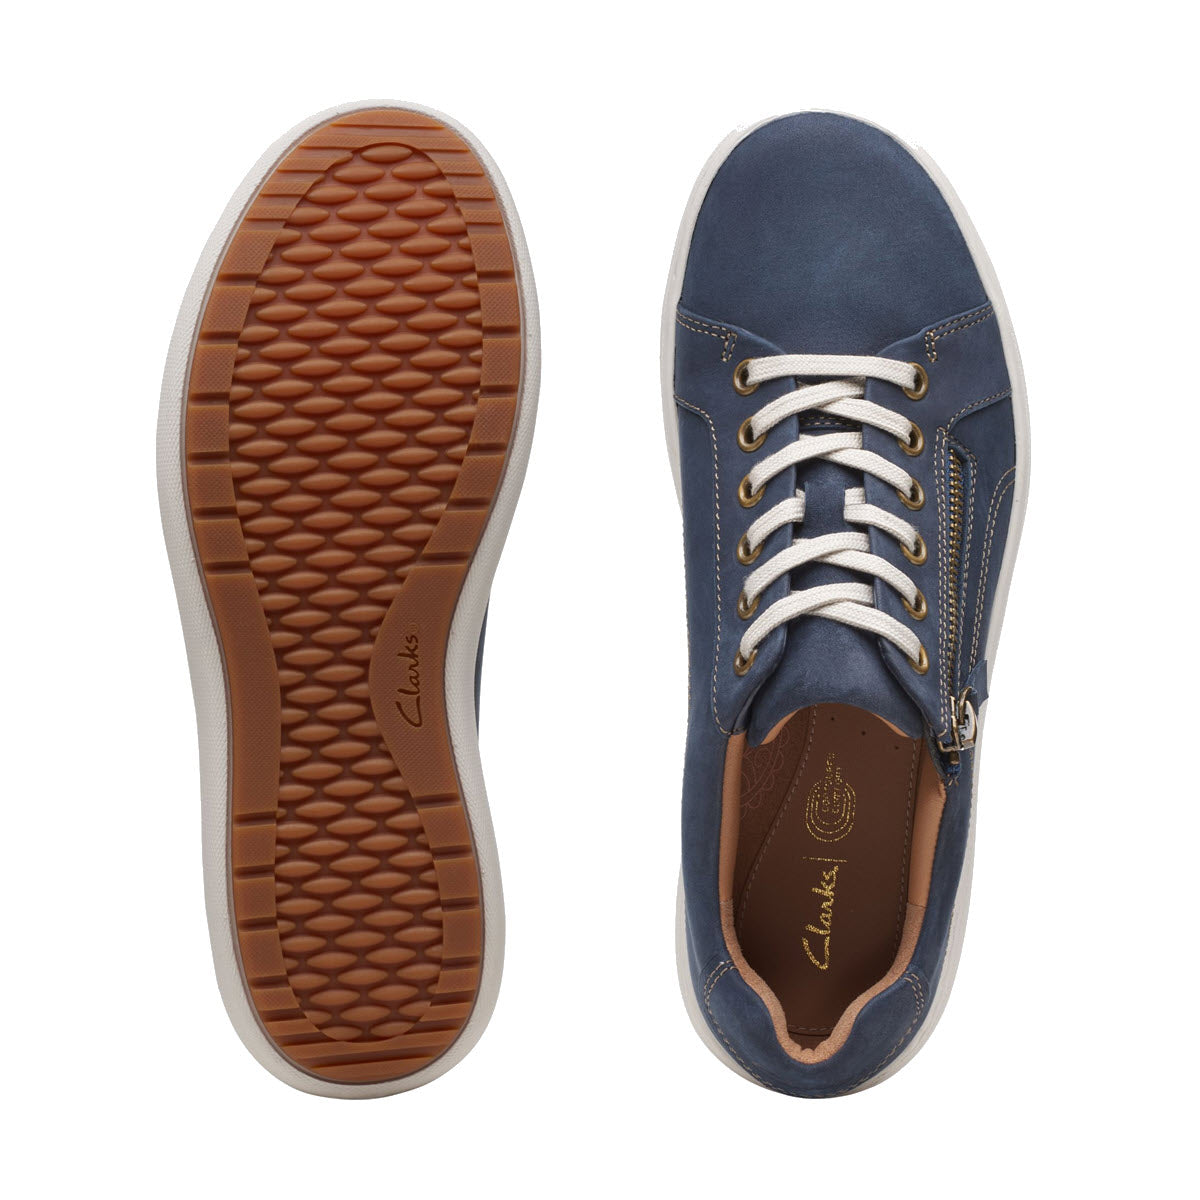 A pair of blue Clarks Nalle Lace Navy sneakers with white laces, displayed with one shoe facing up and the other showing the sole.